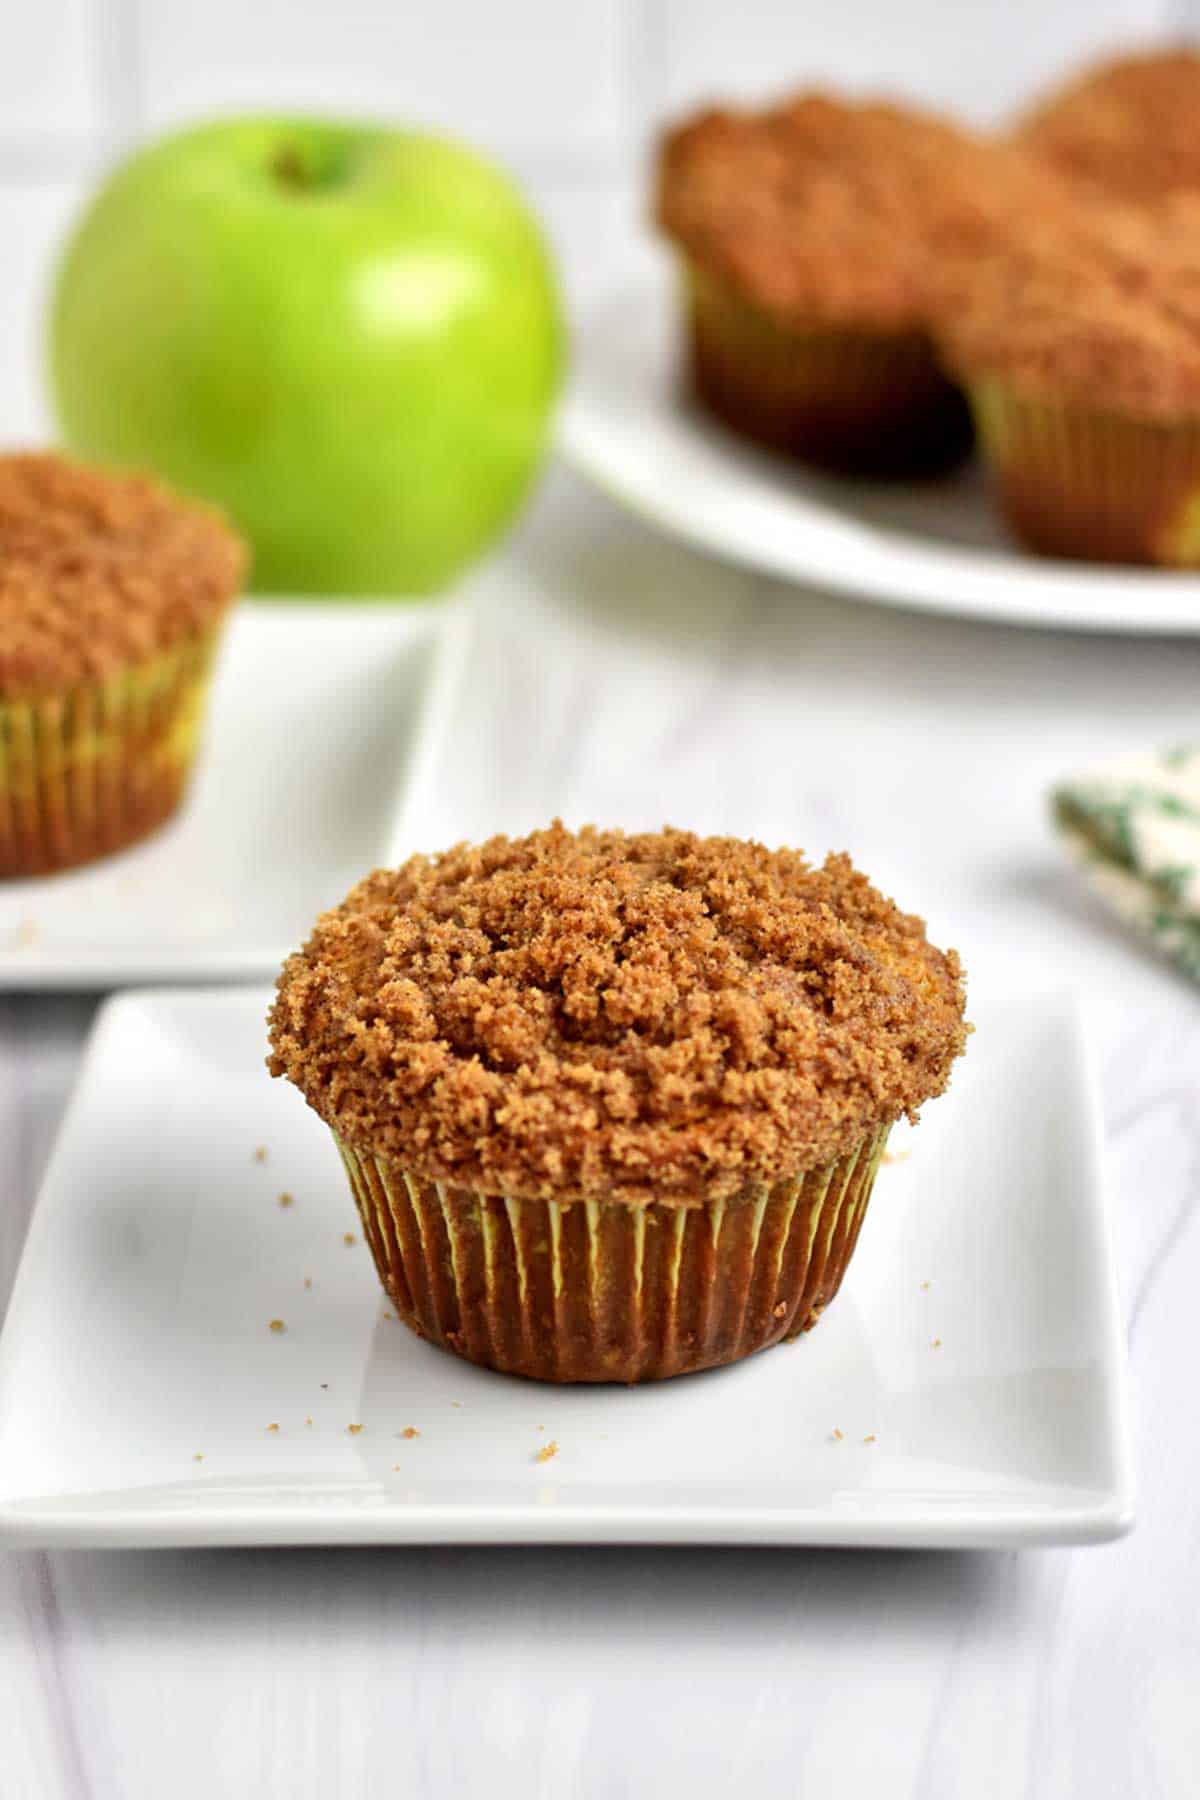 Two gluten free apple muffins on small white plates with a Granny Smith apple and more muffins in the background.